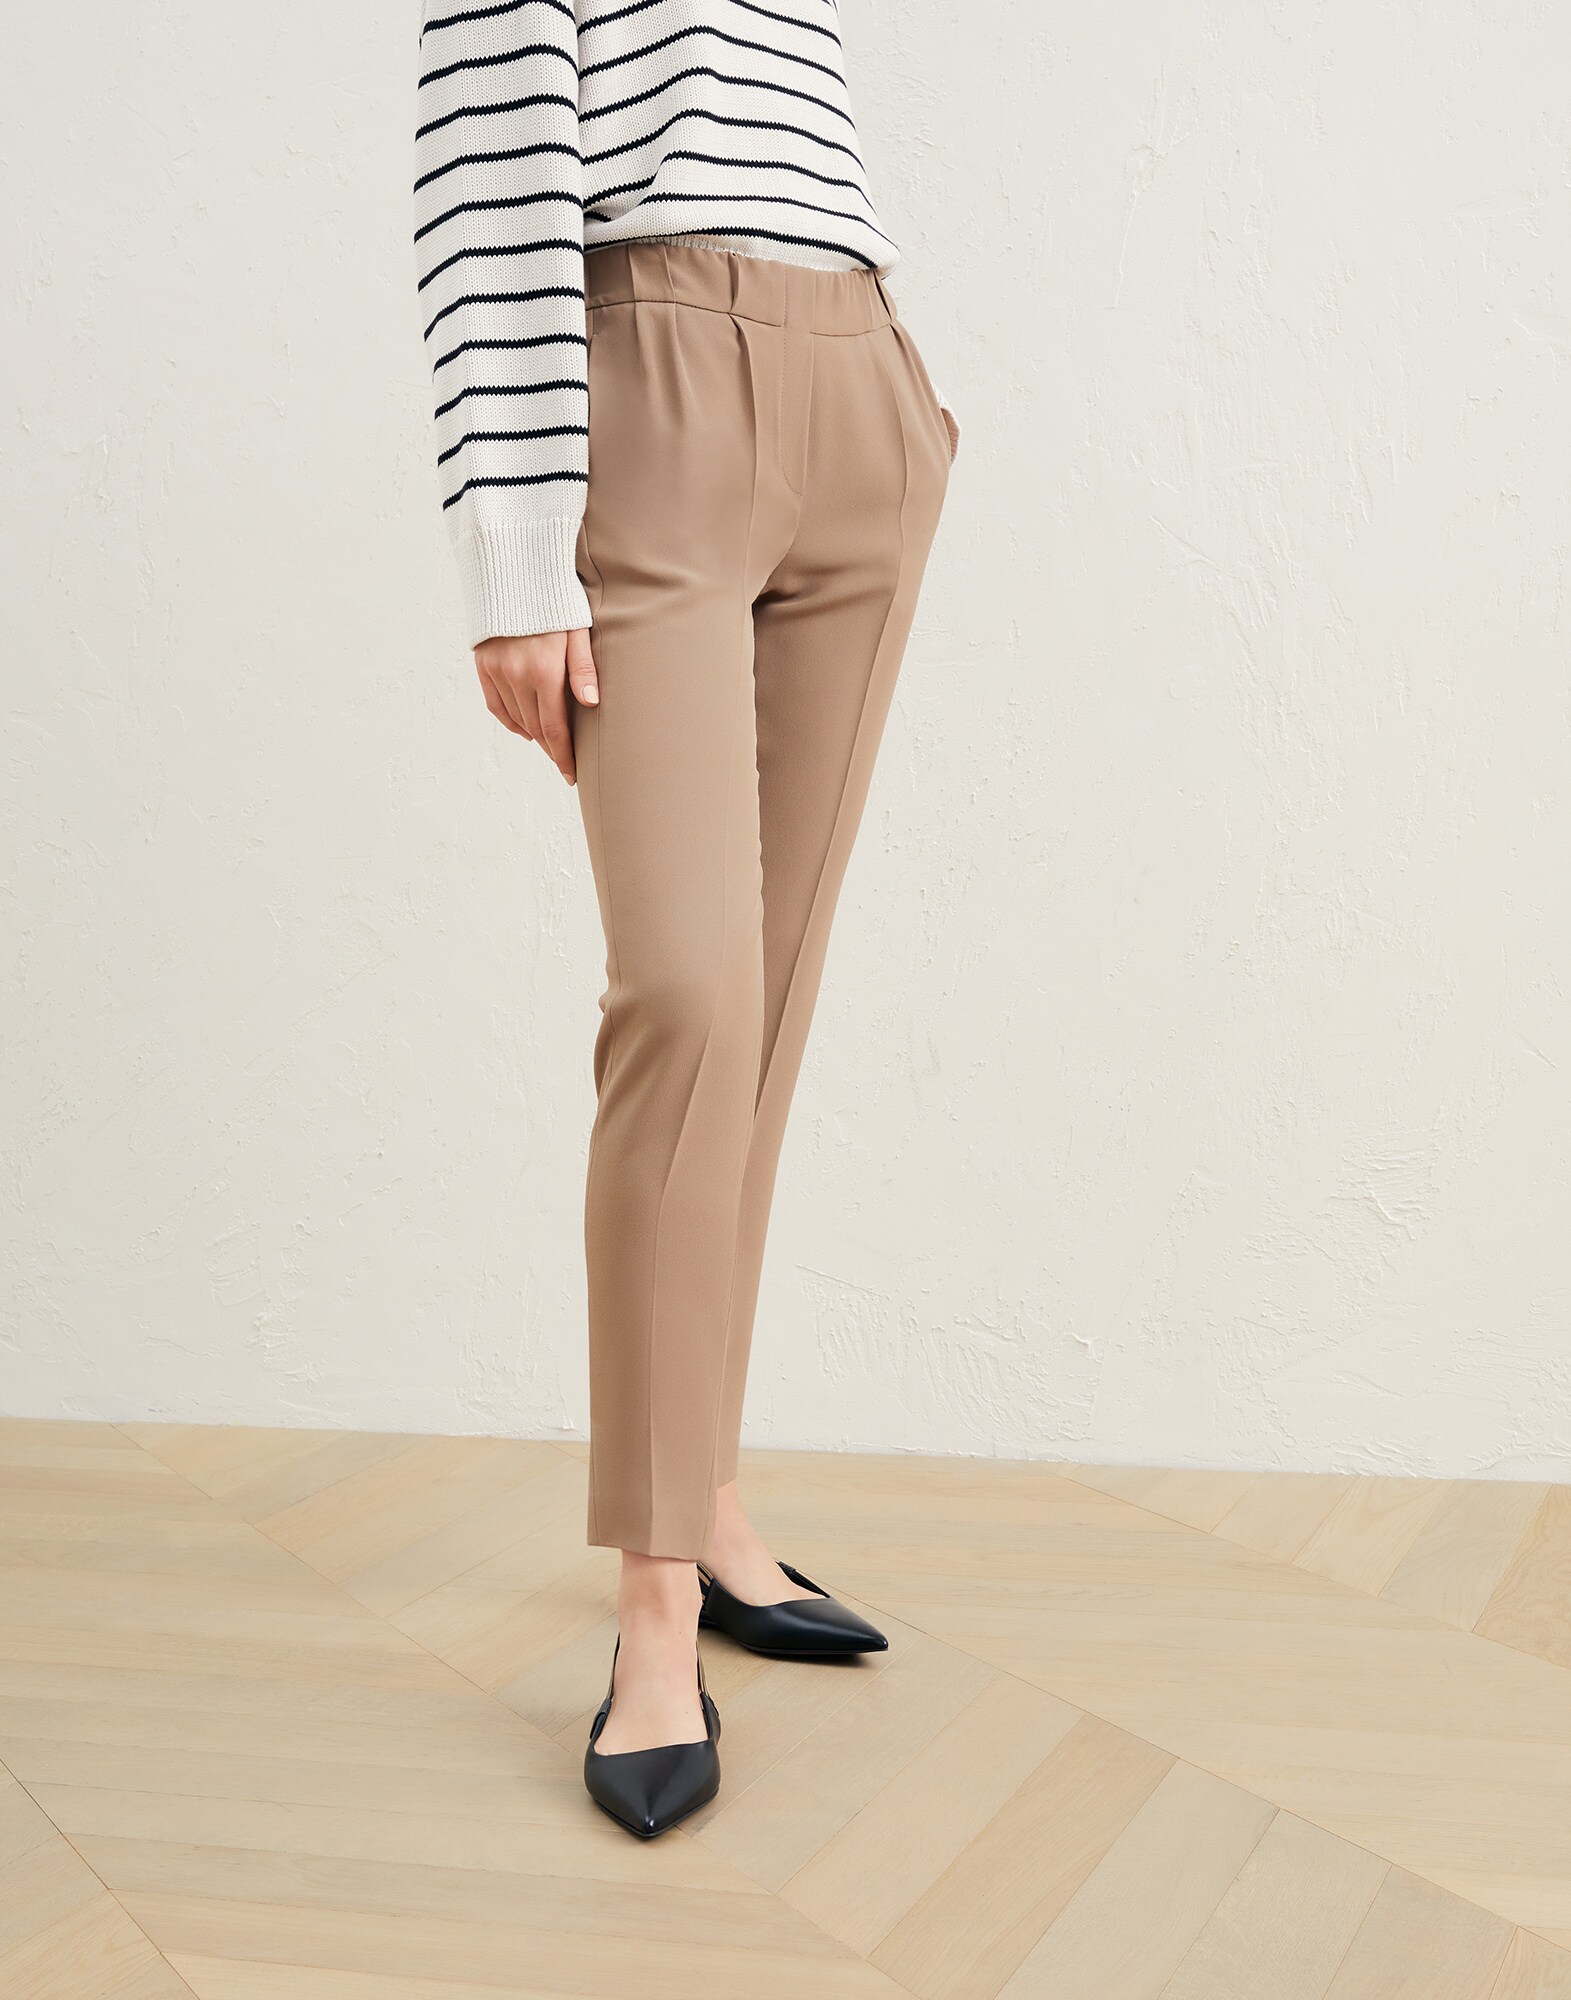 Tailored Jogger trousers